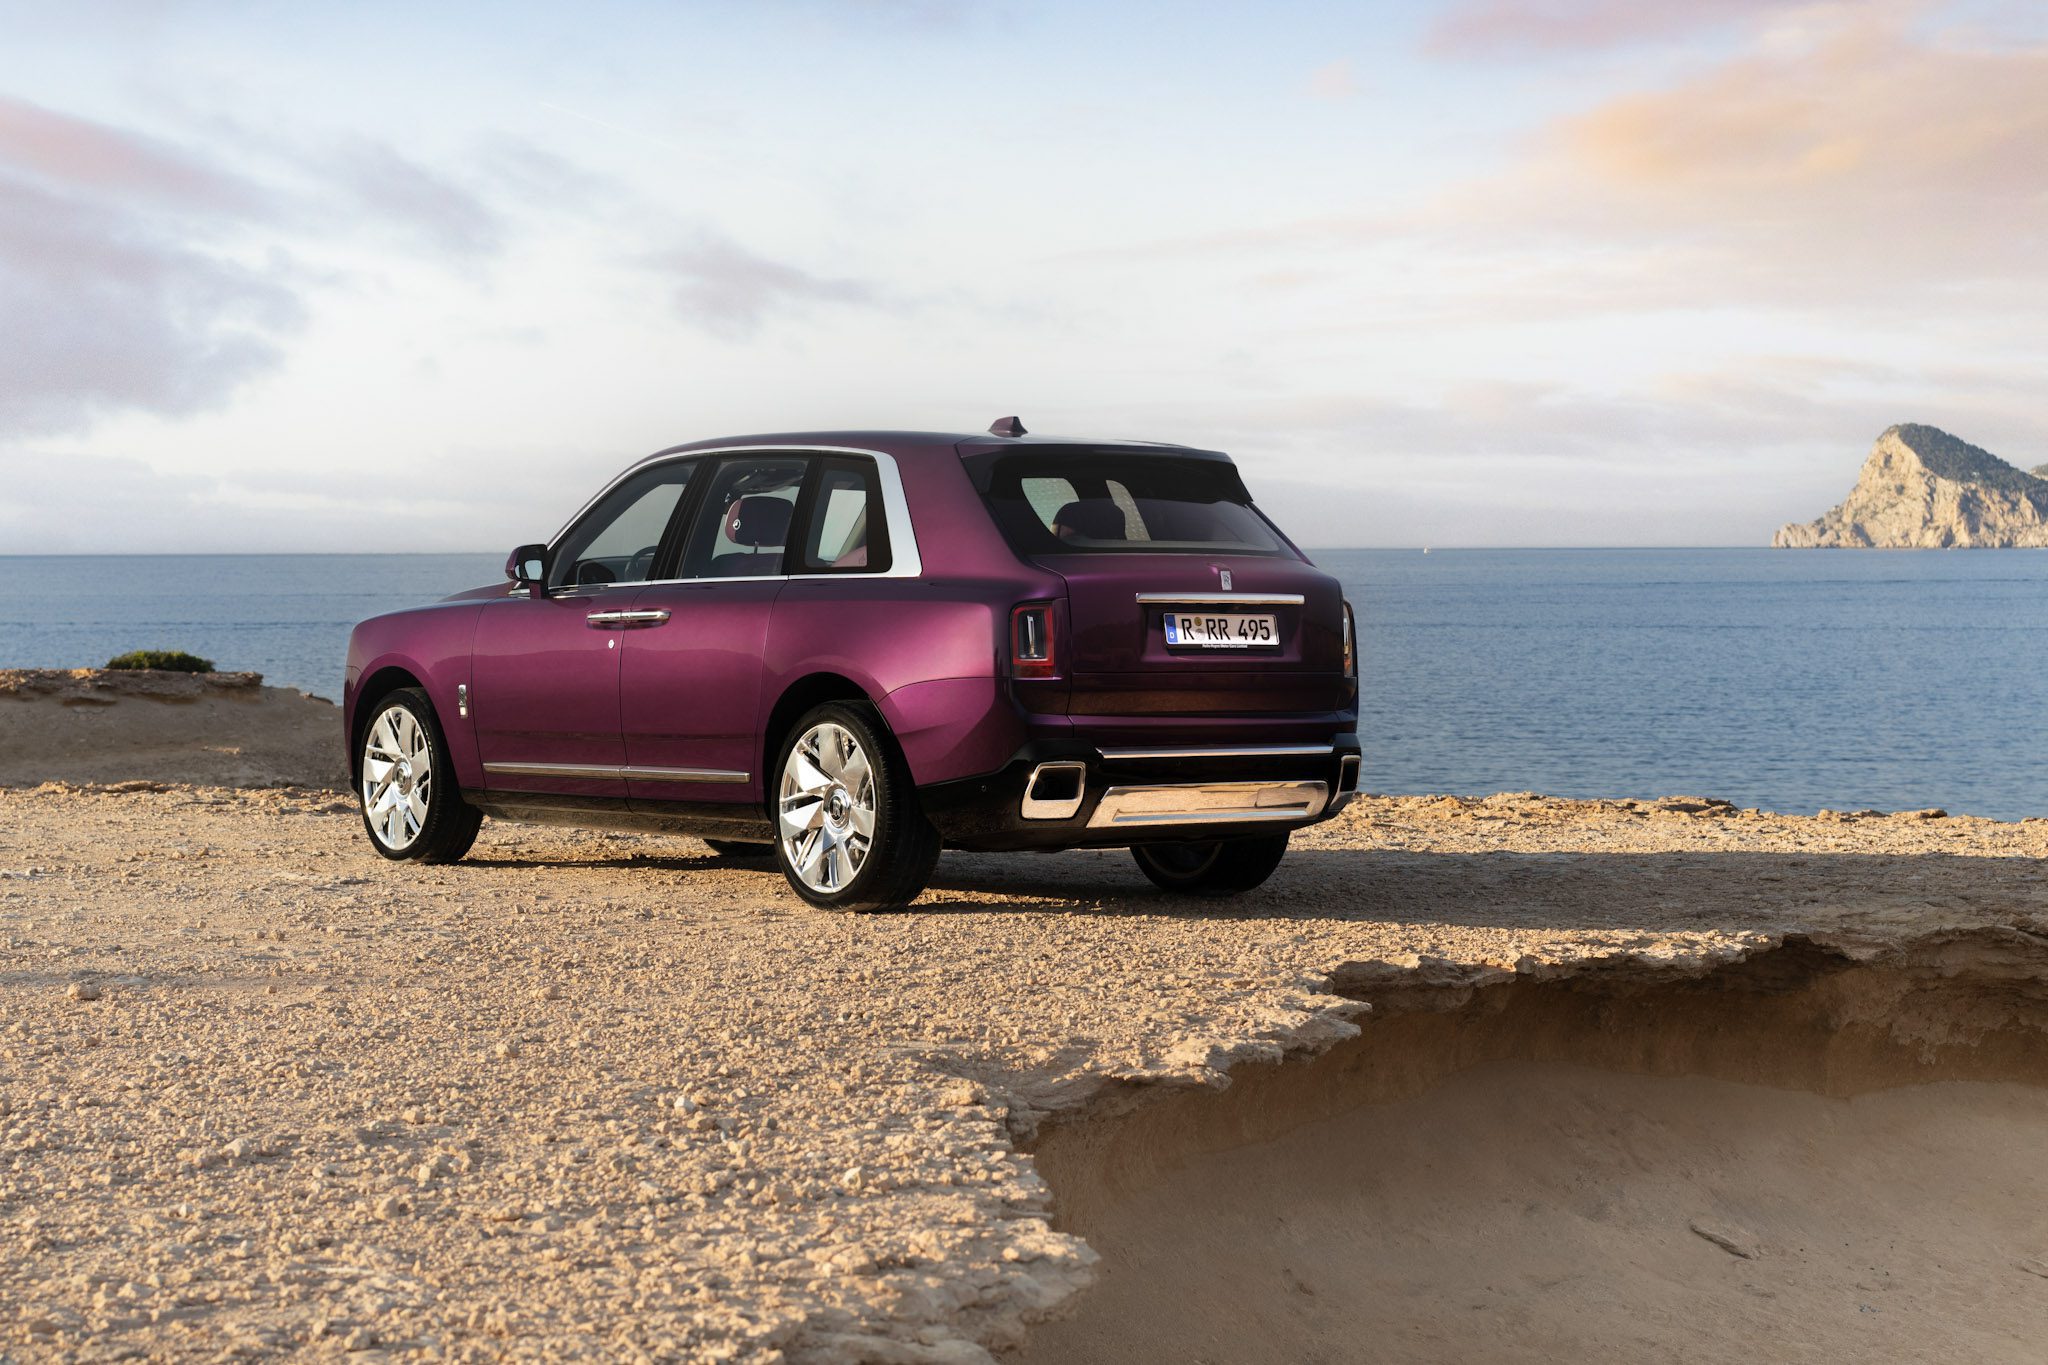 An image of a Rolls-Royce Cullinan outdoors.